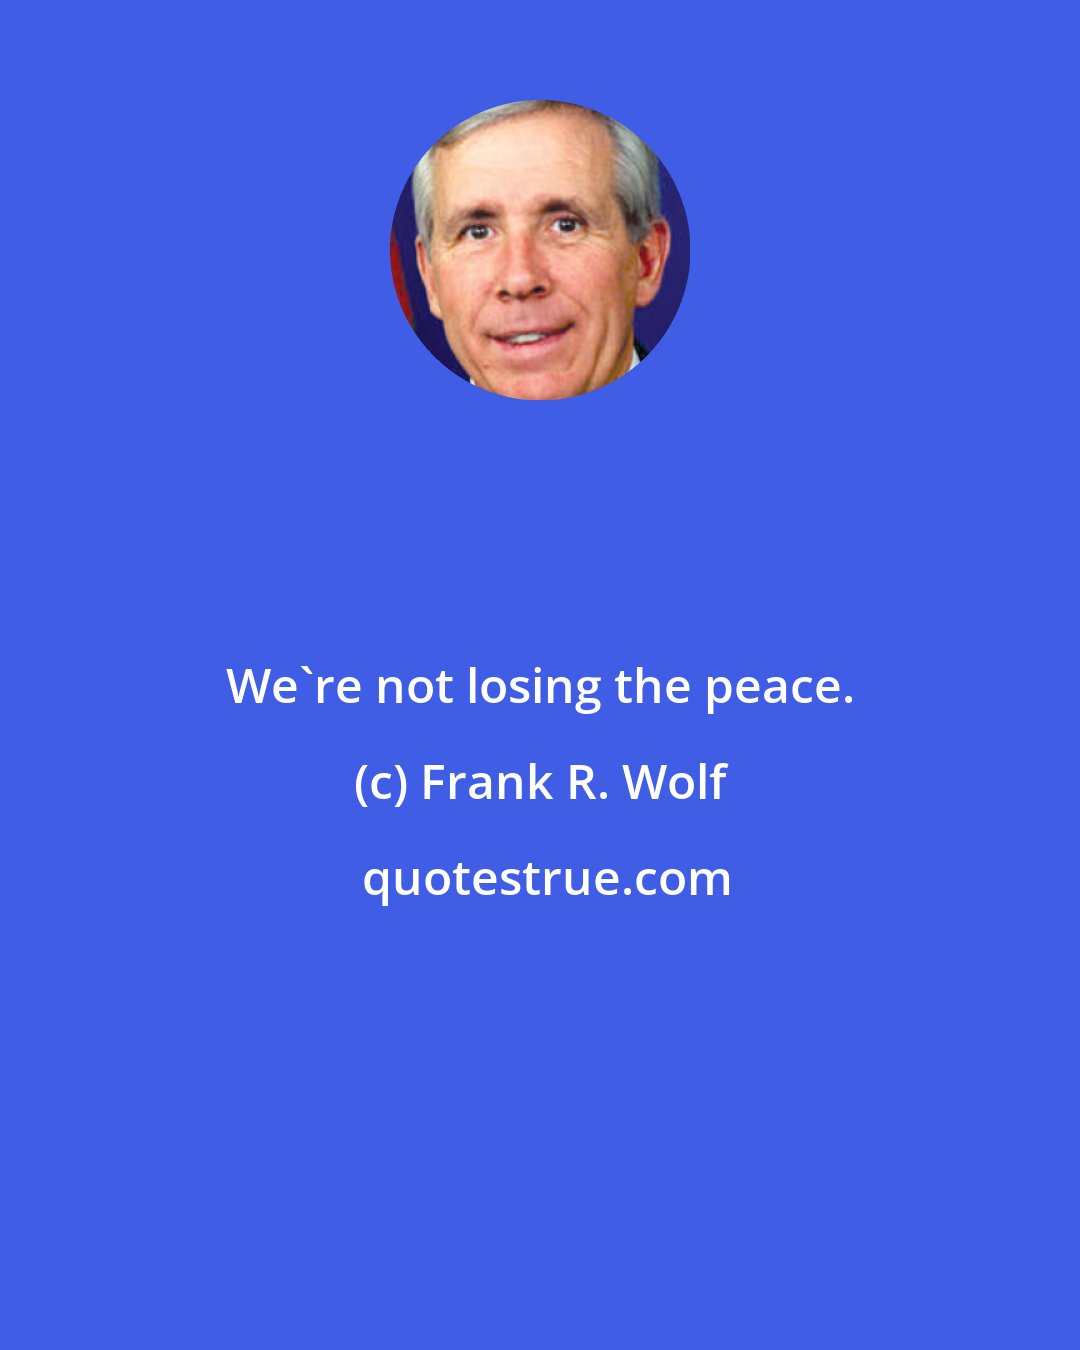 Frank R. Wolf: We're not losing the peace.